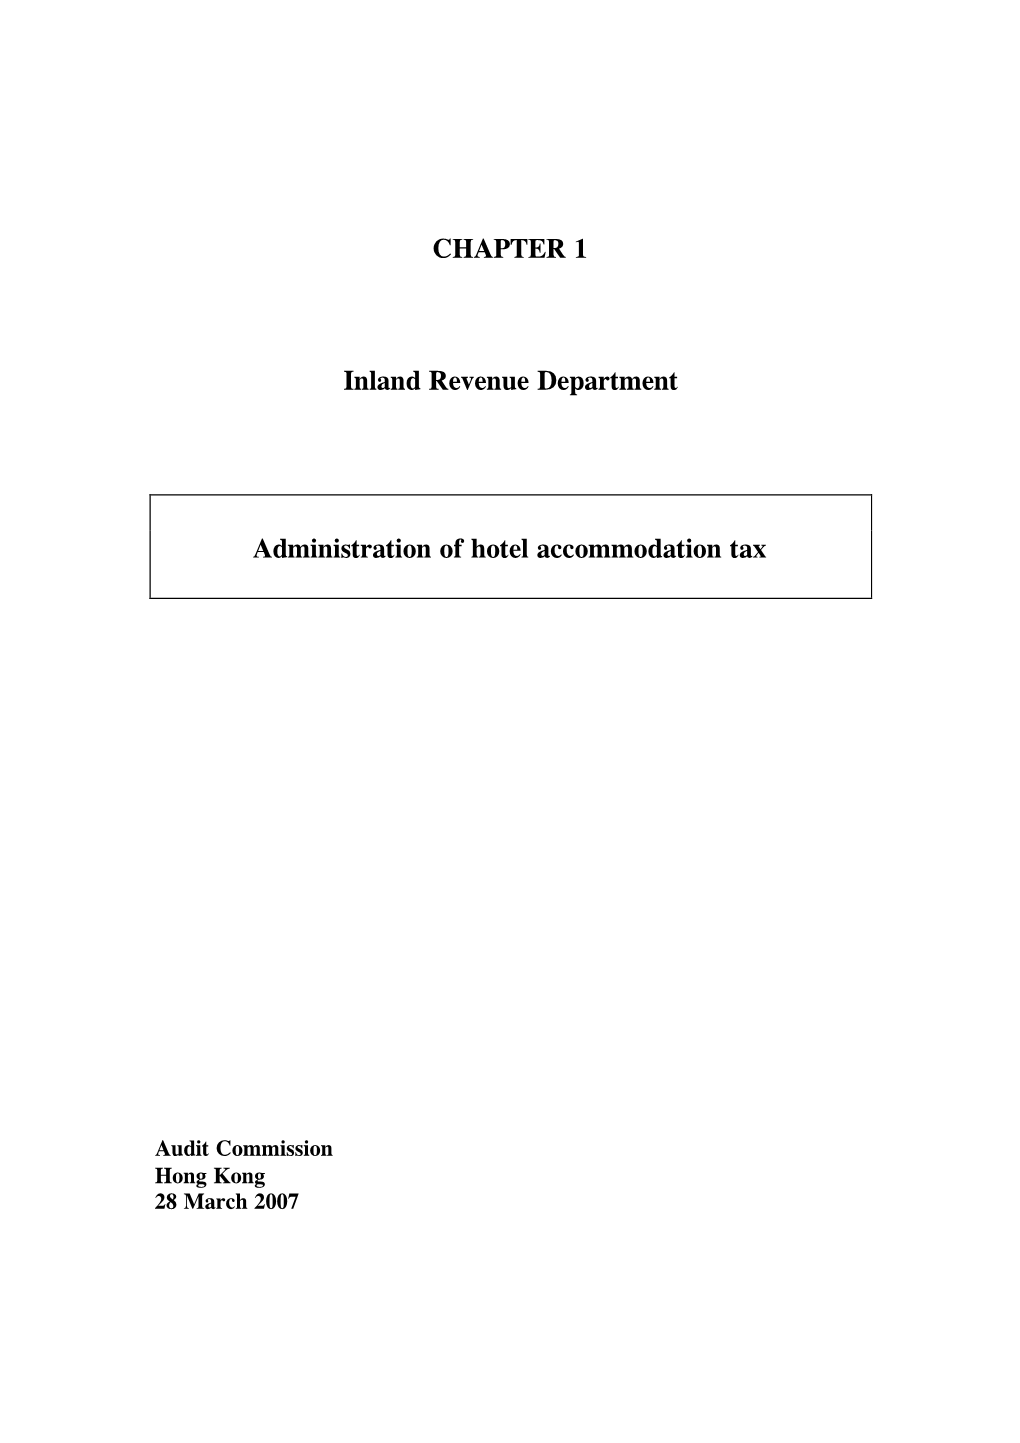 CHAPTER 1 Inland Revenue Department Administration of Hotel